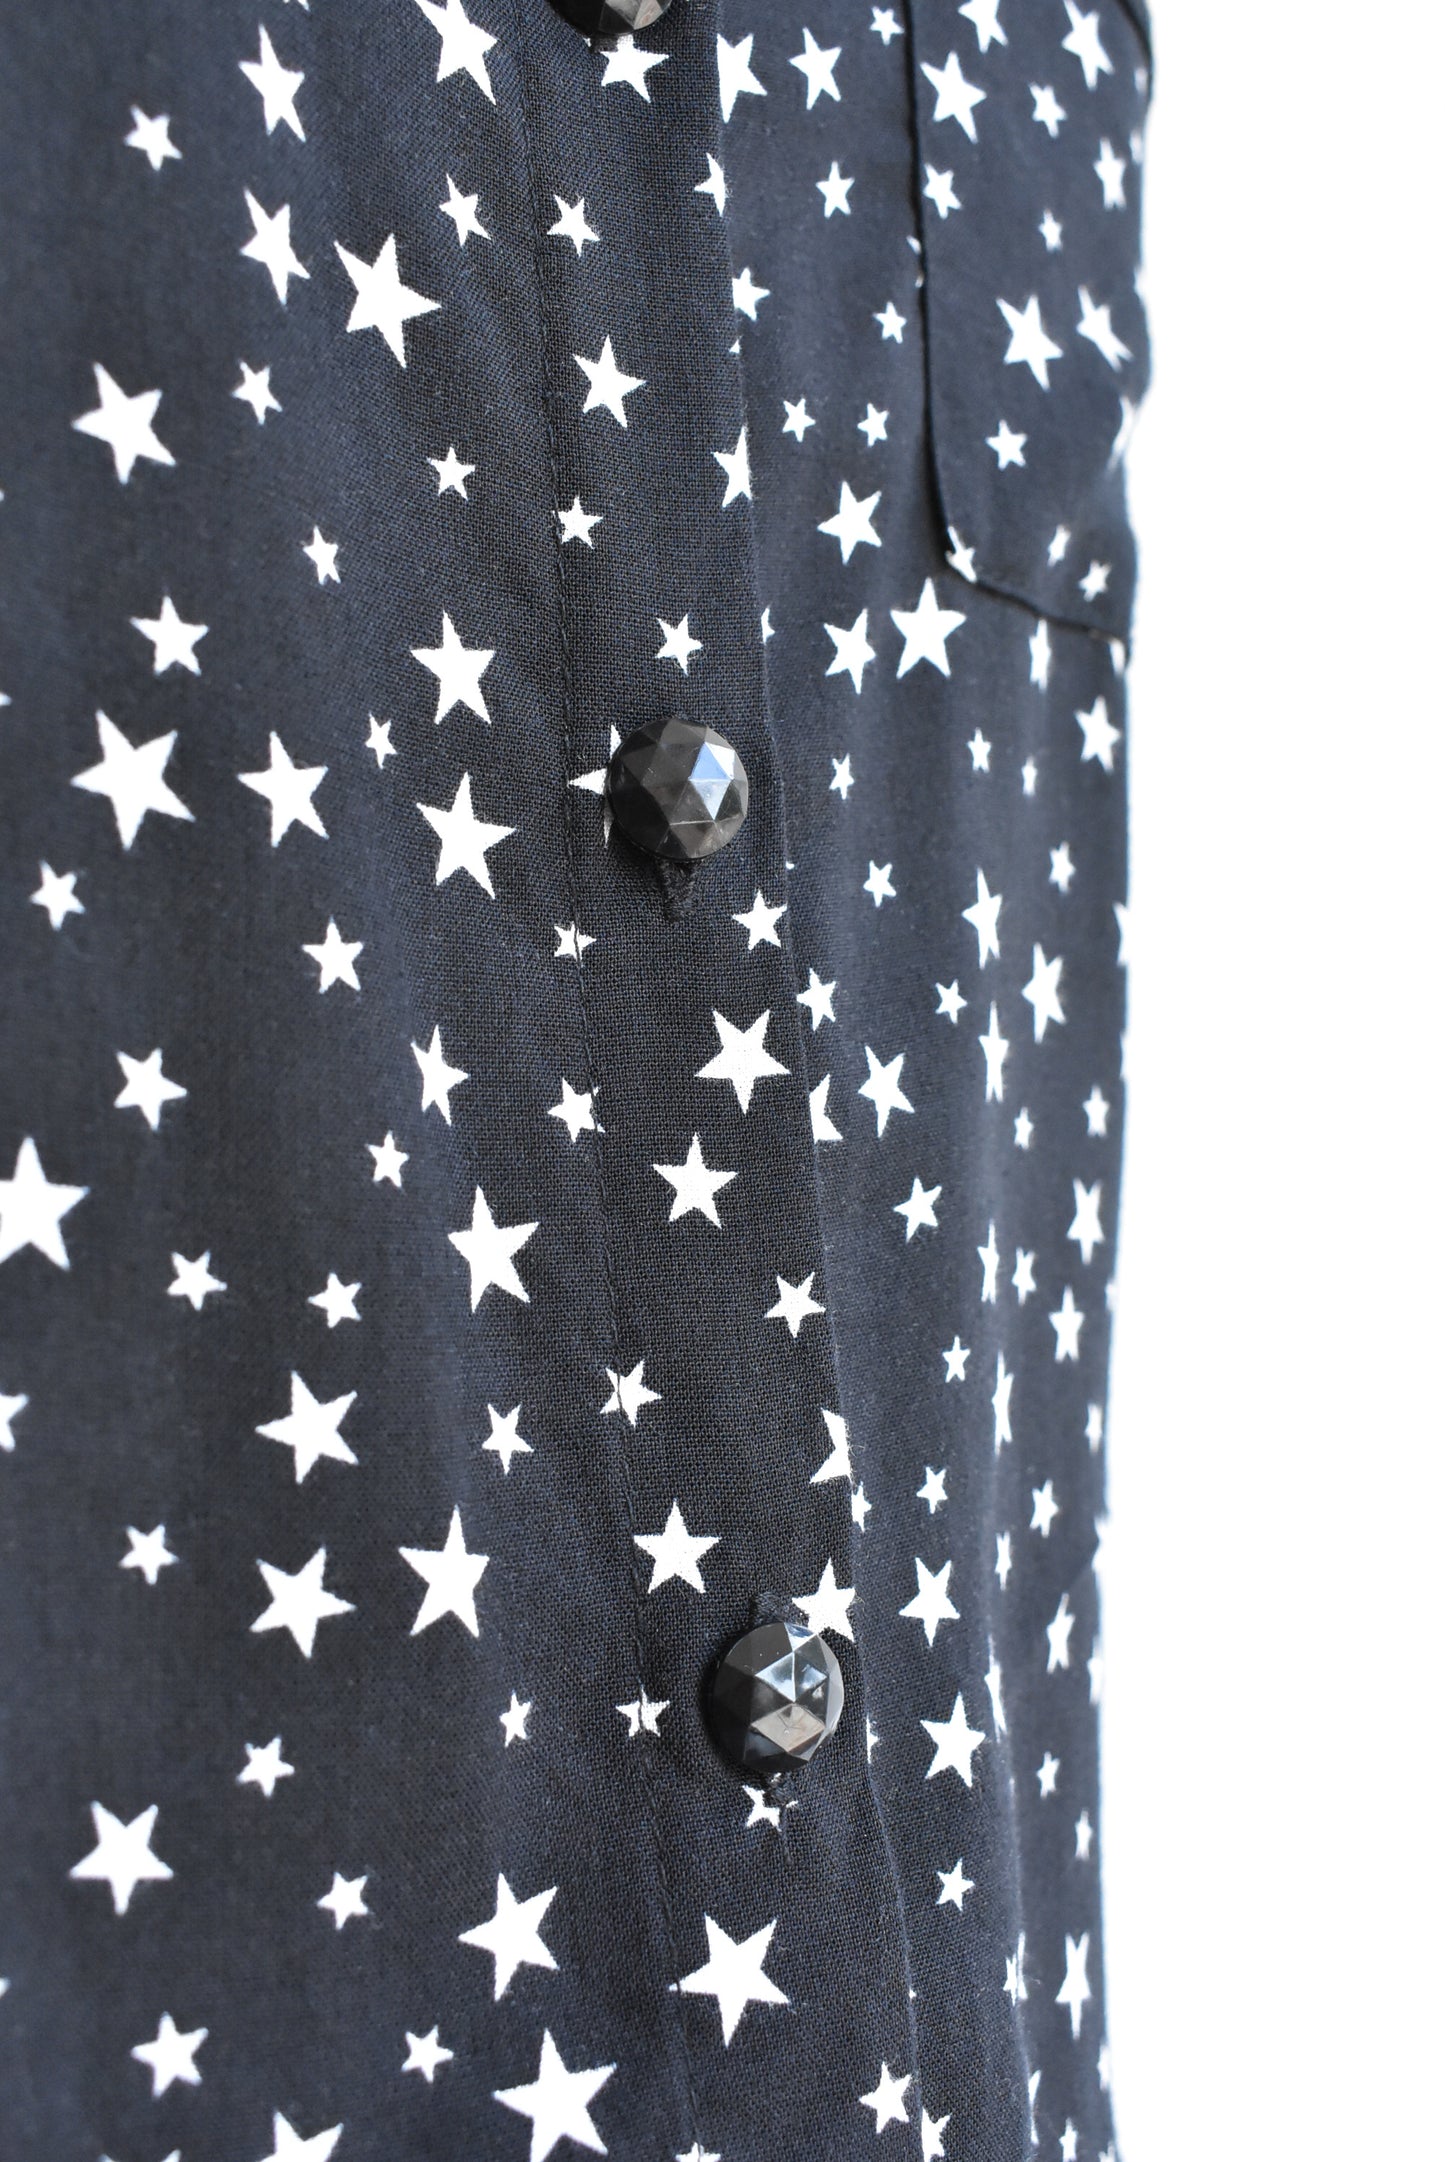 Candy Couture starry jumpsuit, size XS